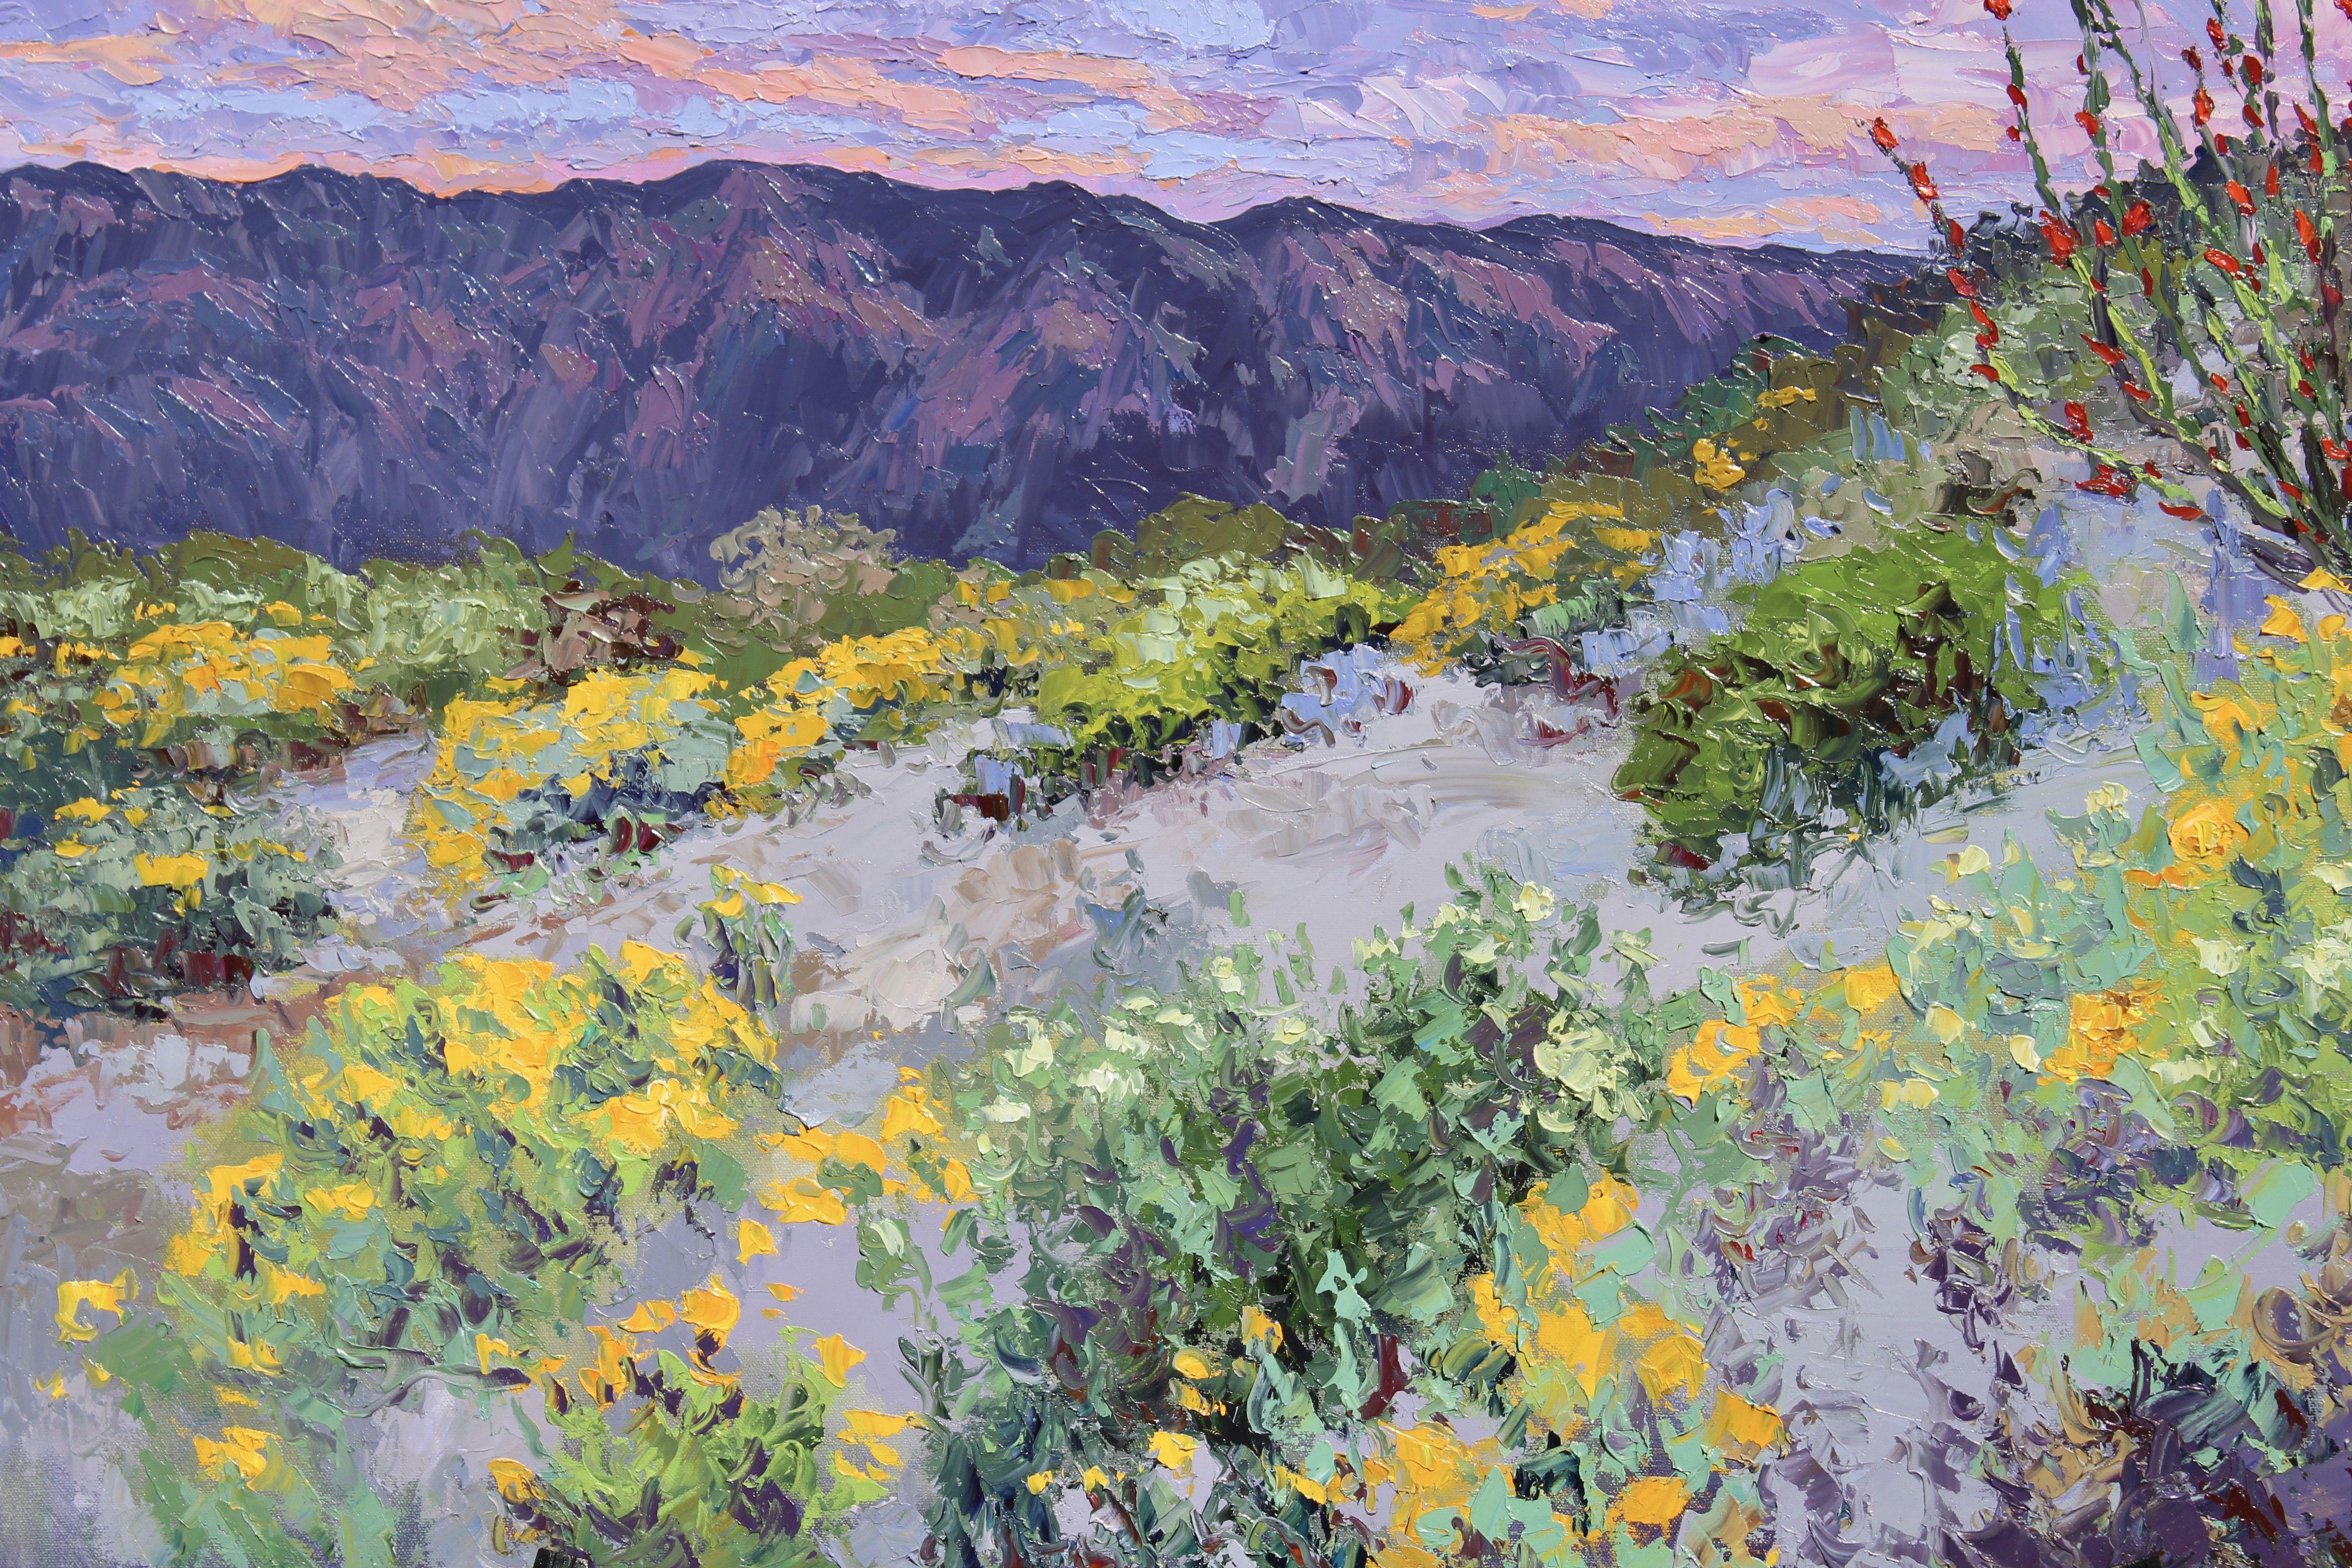 An original oil painting of the Southern California Desert featuring a glowing desert evening sky, mountains and lovely wildflowers and a barefoot ocotillo.    This painting comes with a certificate of authenticity and has been painted with the